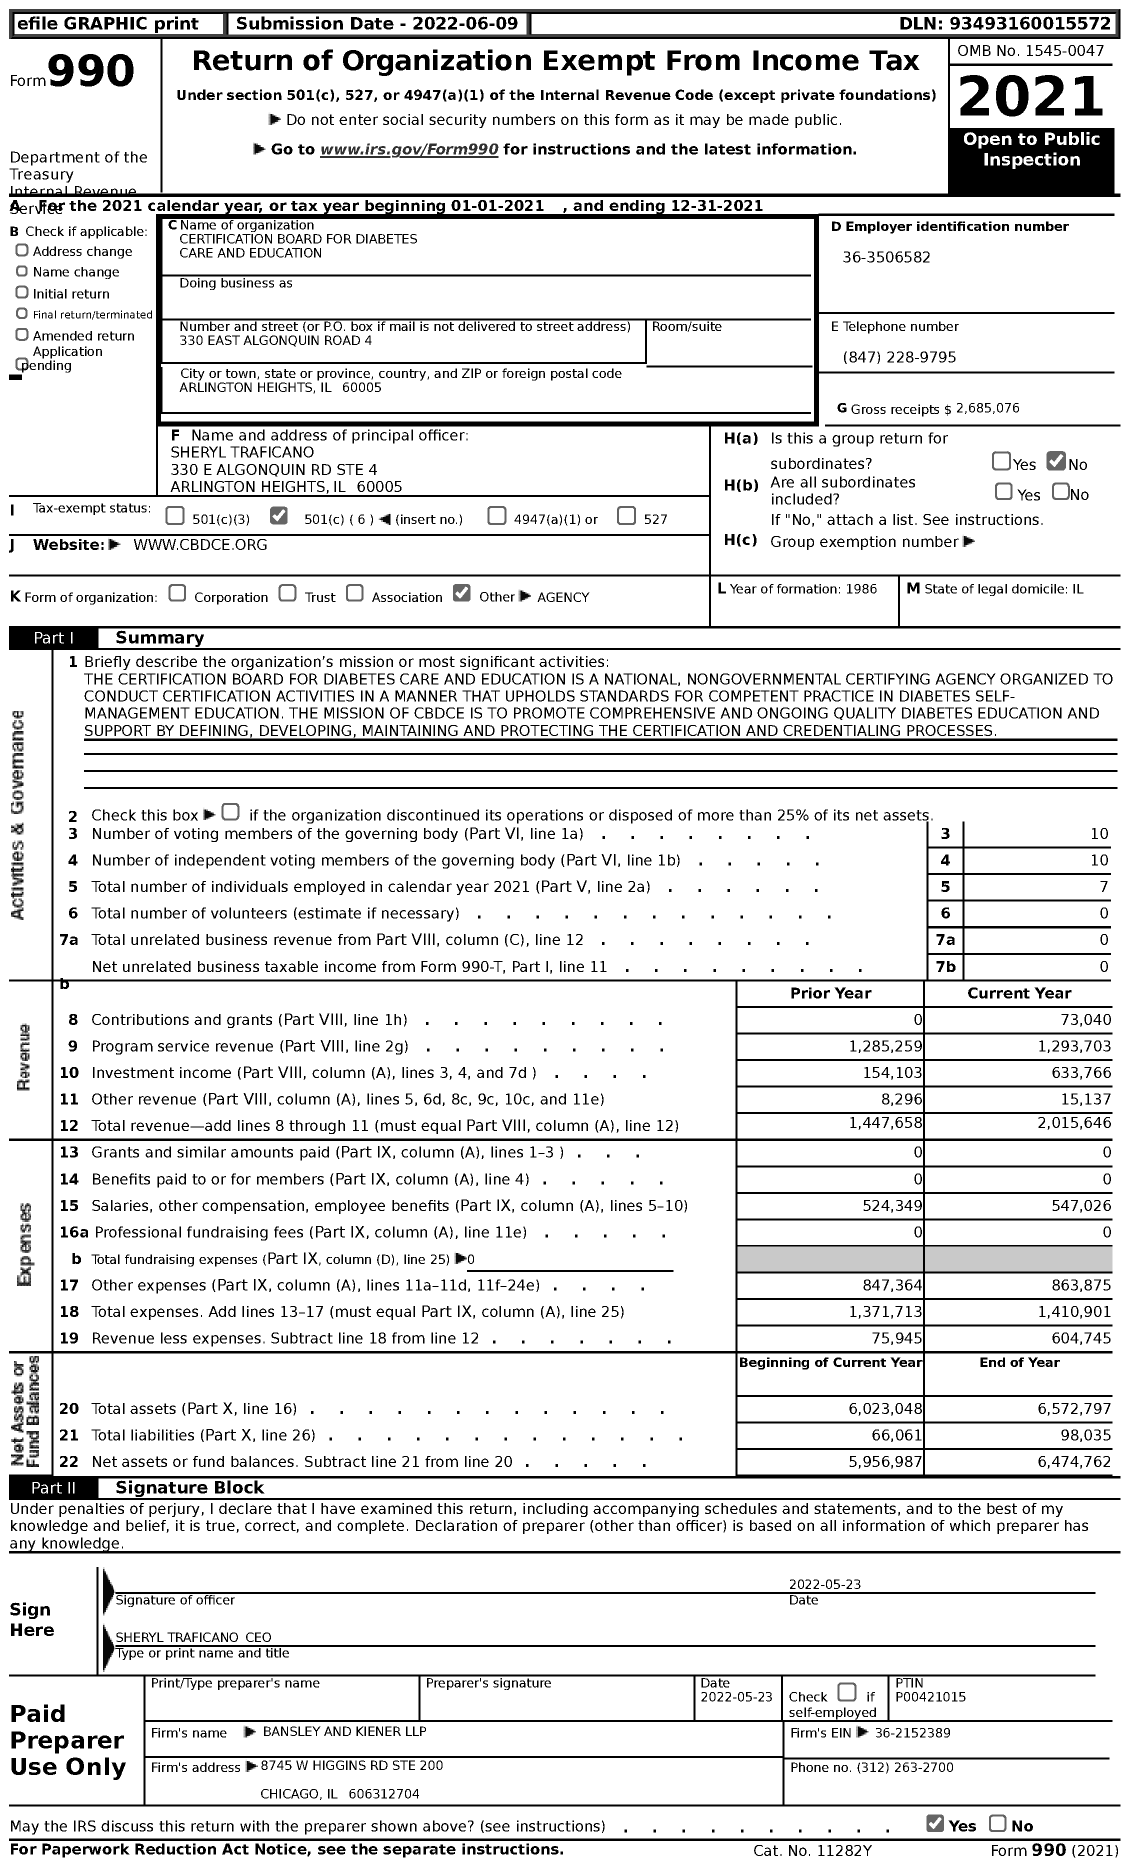 Image of first page of 2021 Form 990 for Certification Board for Diabetes Care and Education (NCBDE)